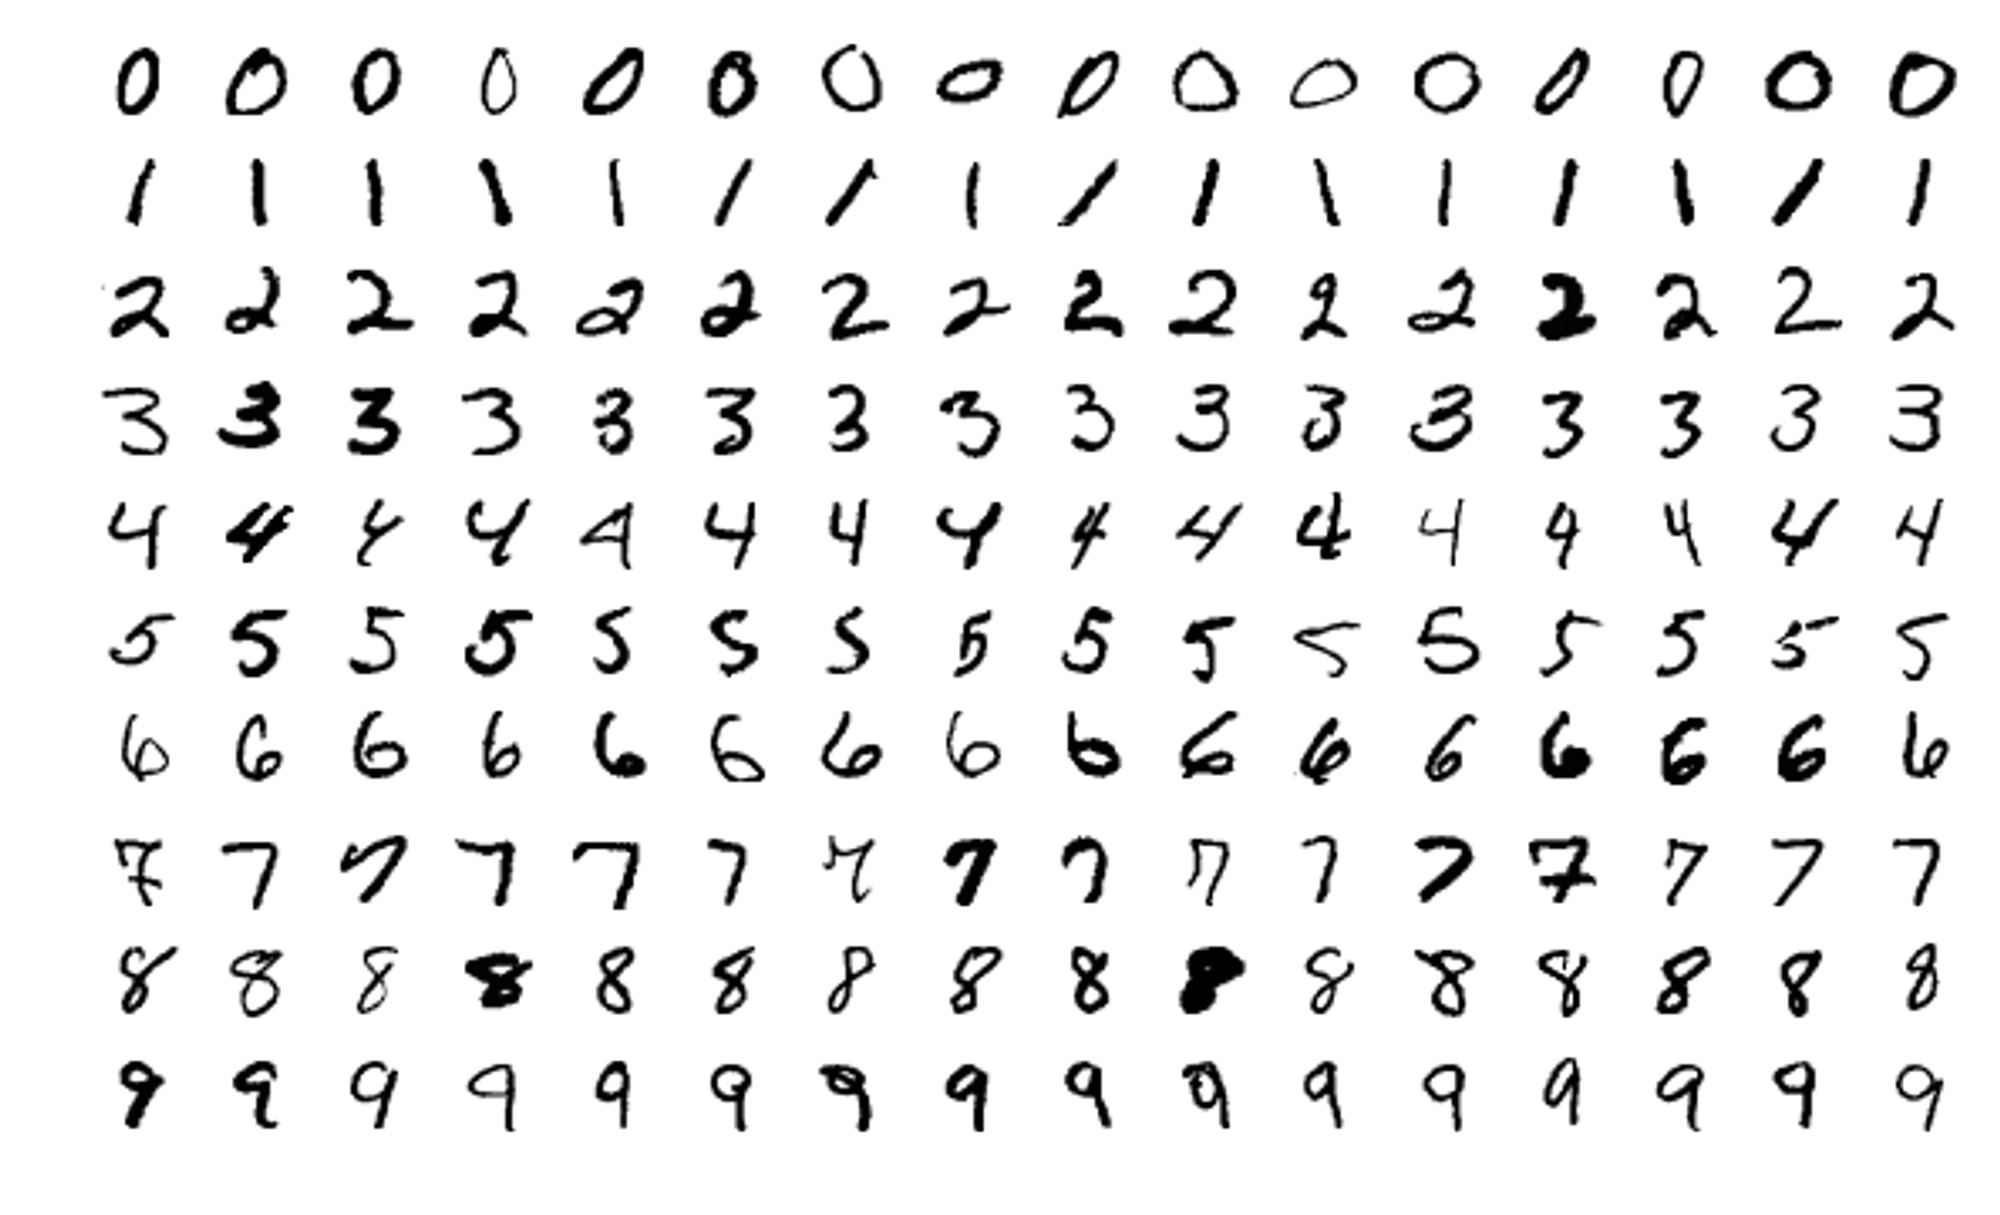 Handwriting (MNIST) Classification Implemented in Assembly